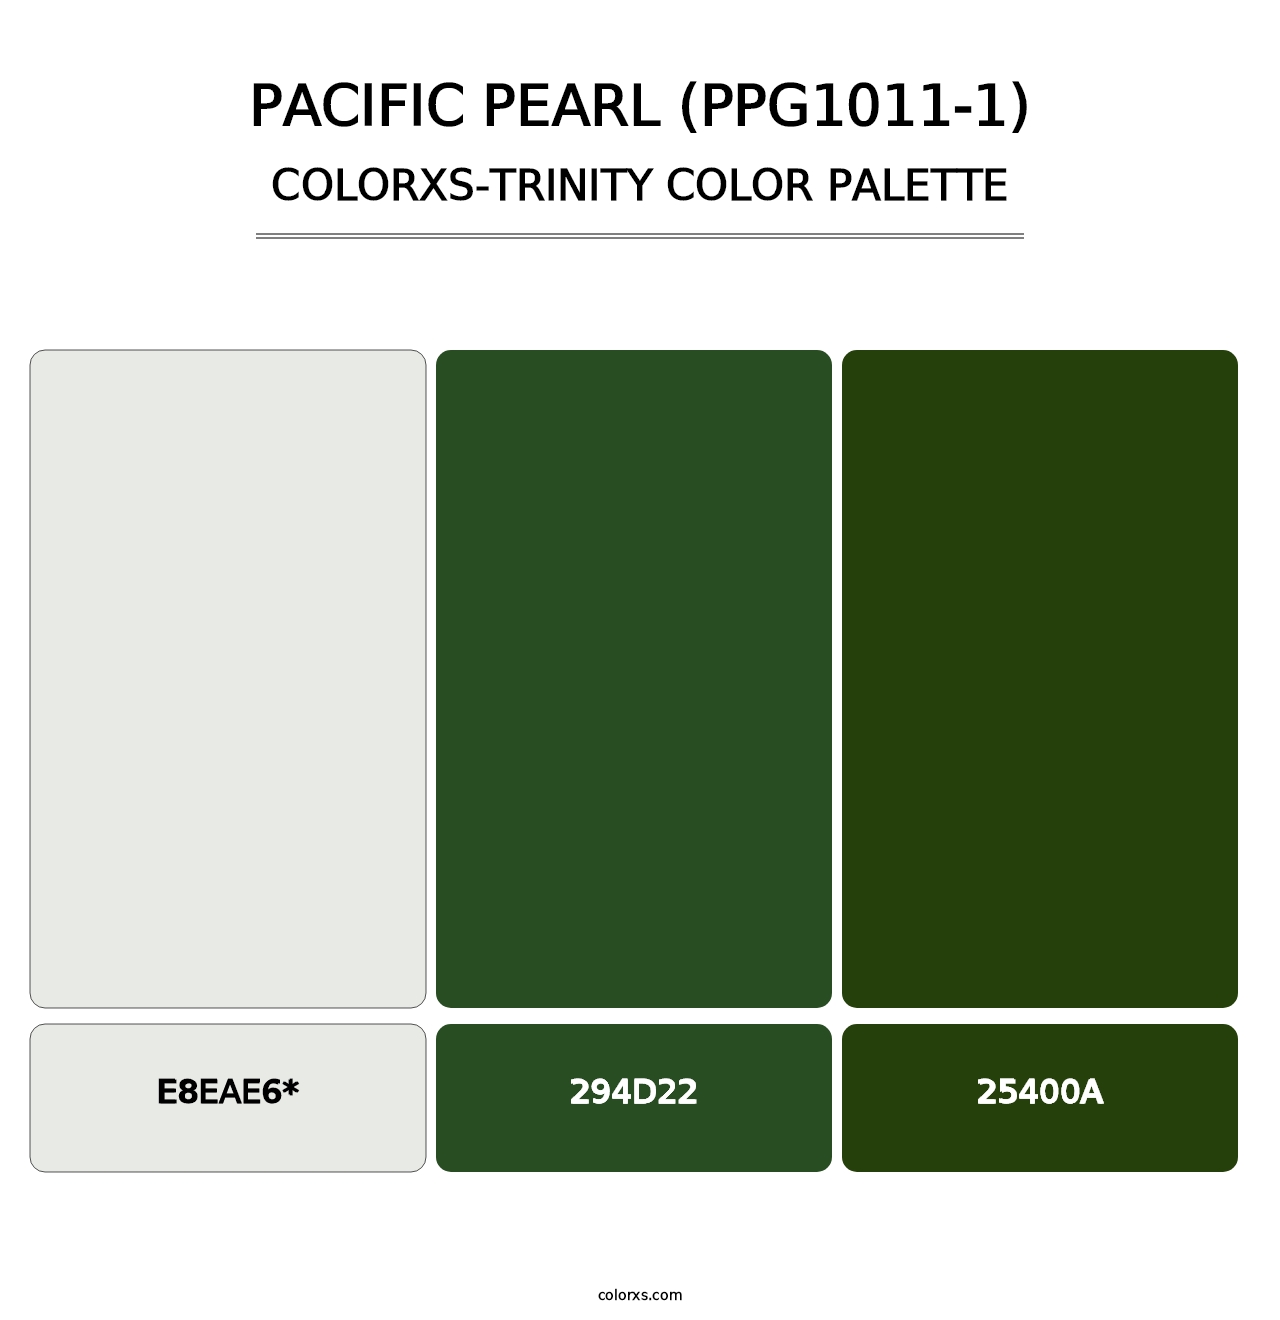 Pacific Pearl (PPG1011-1) - Colorxs Trinity Palette